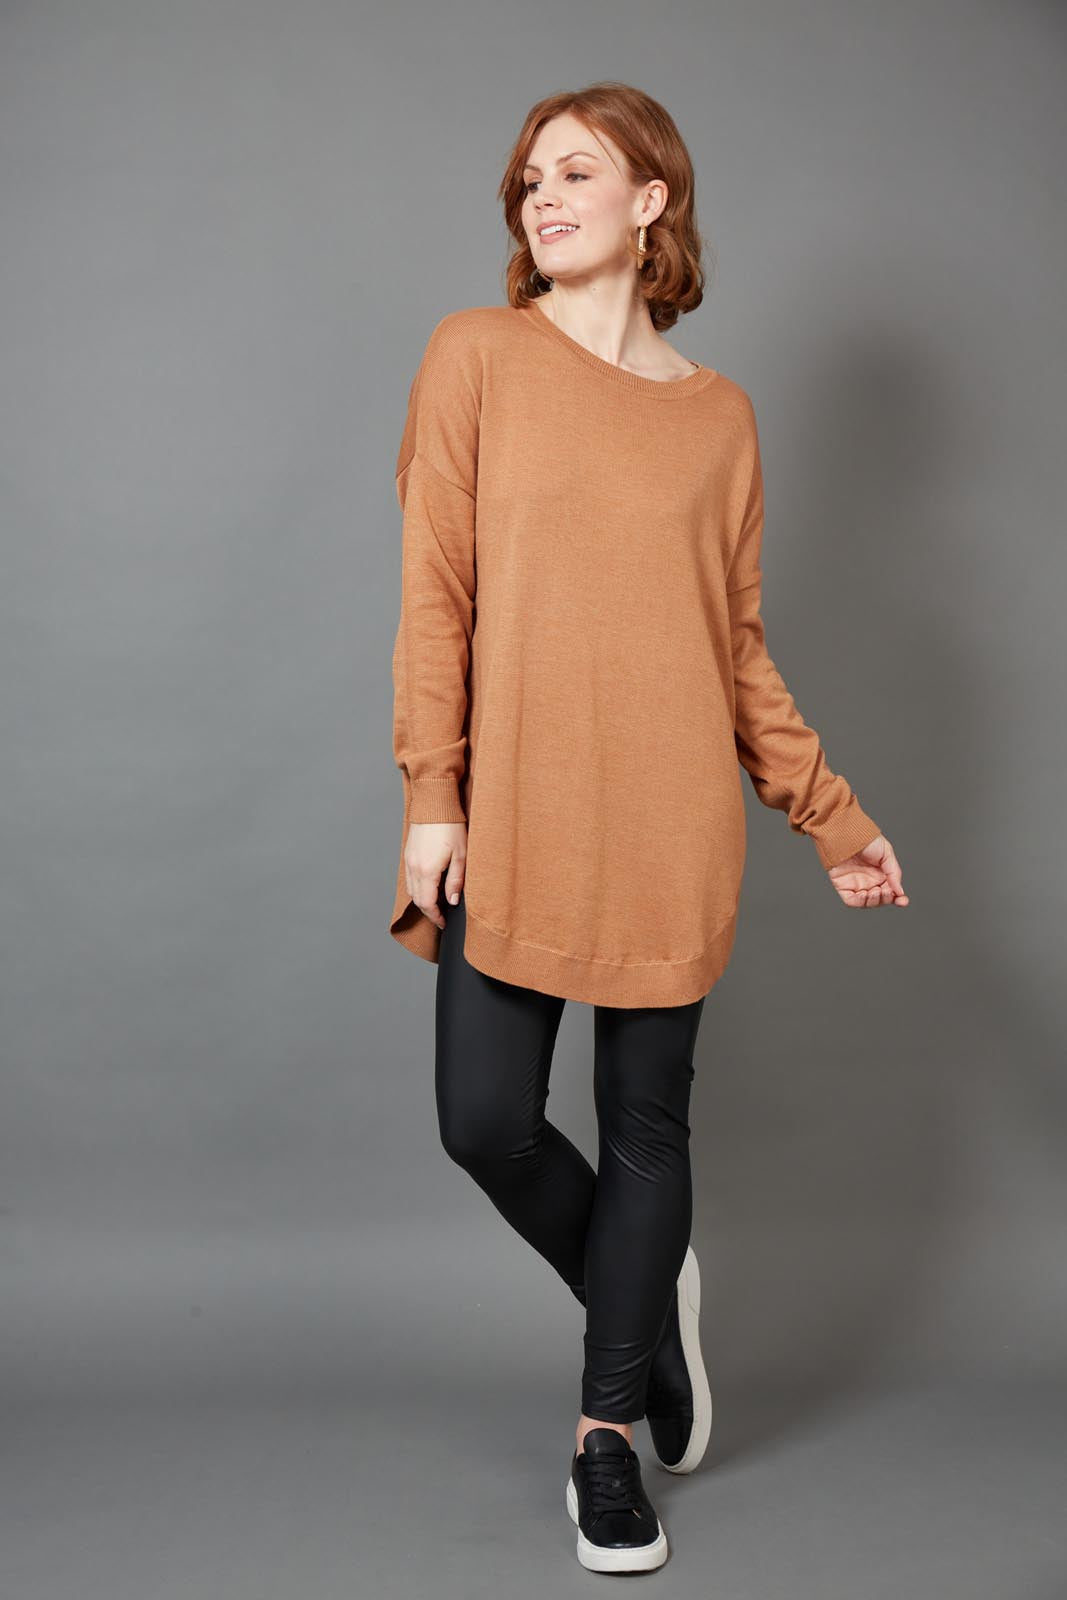 Cleo Jumper - Caramel - eb&ive Clothing - Knit Jumper One Size